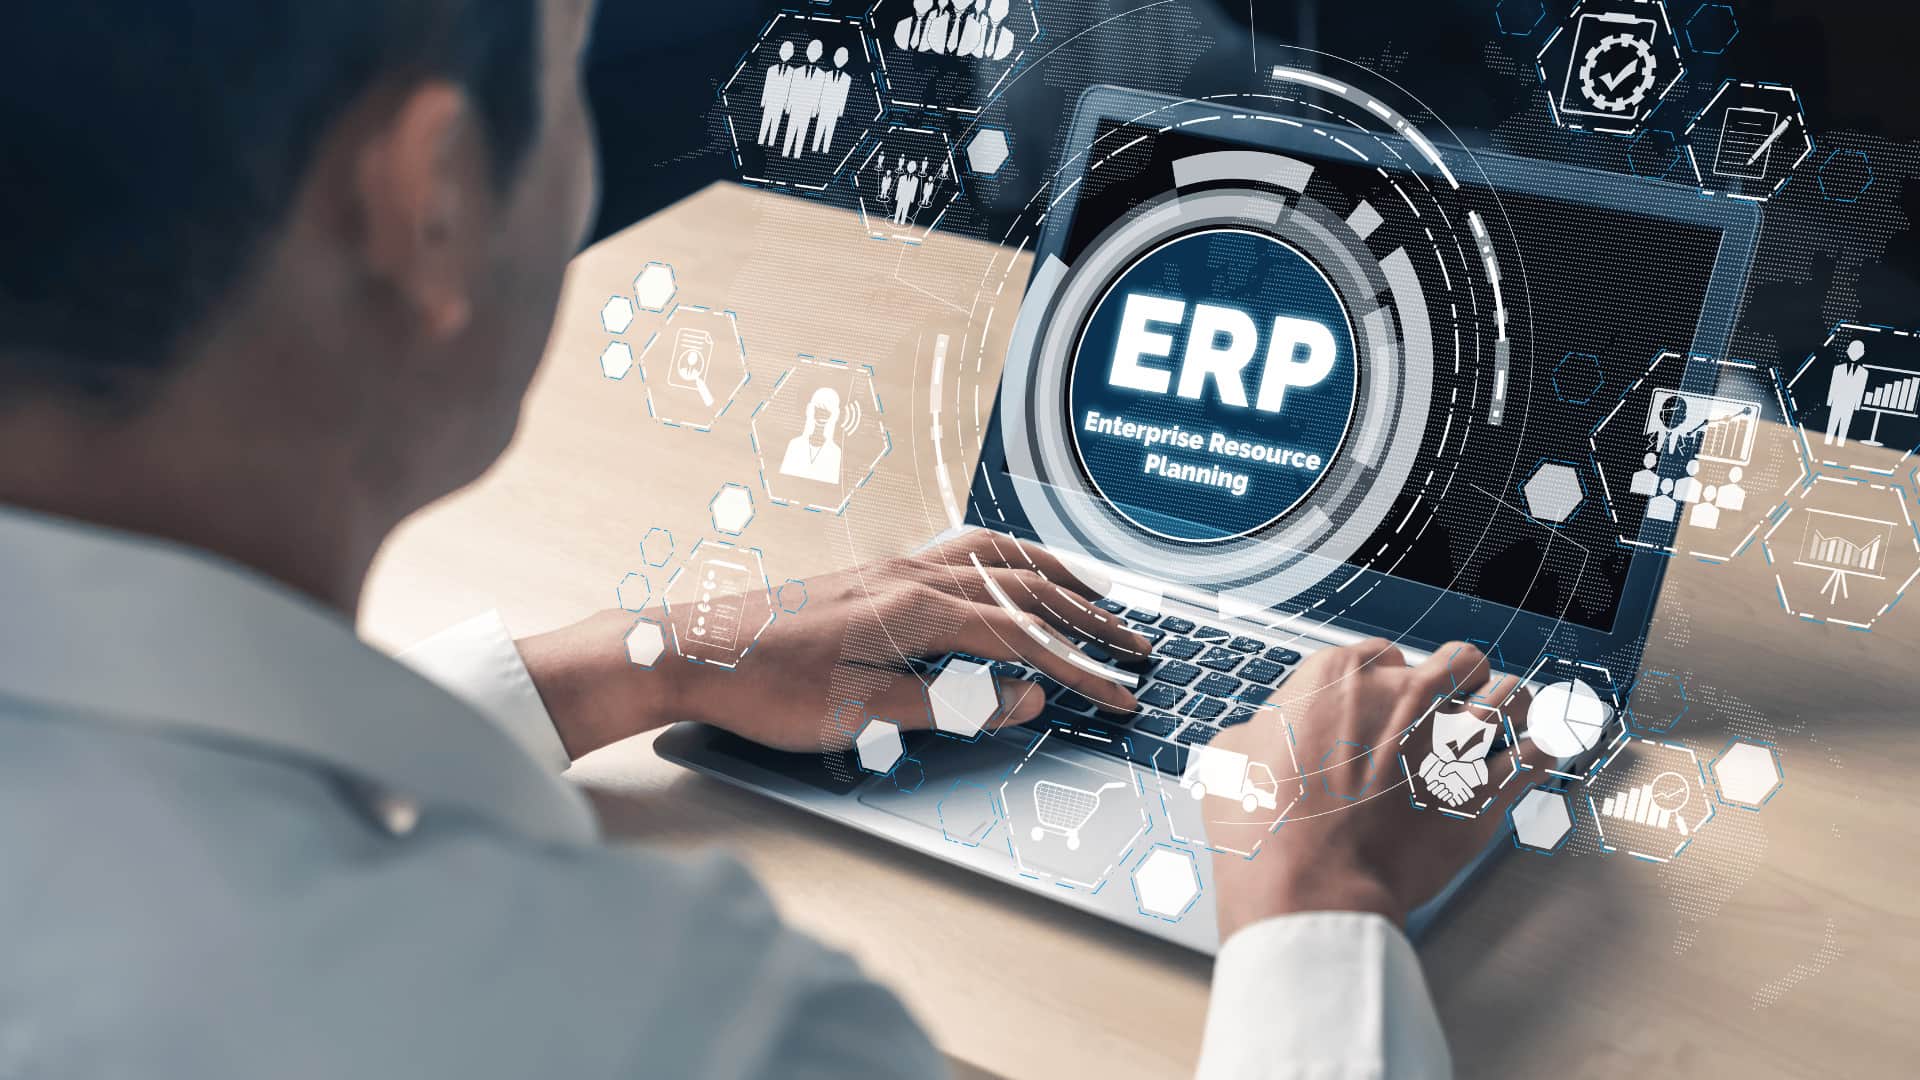 what is erp software development service and how does it work